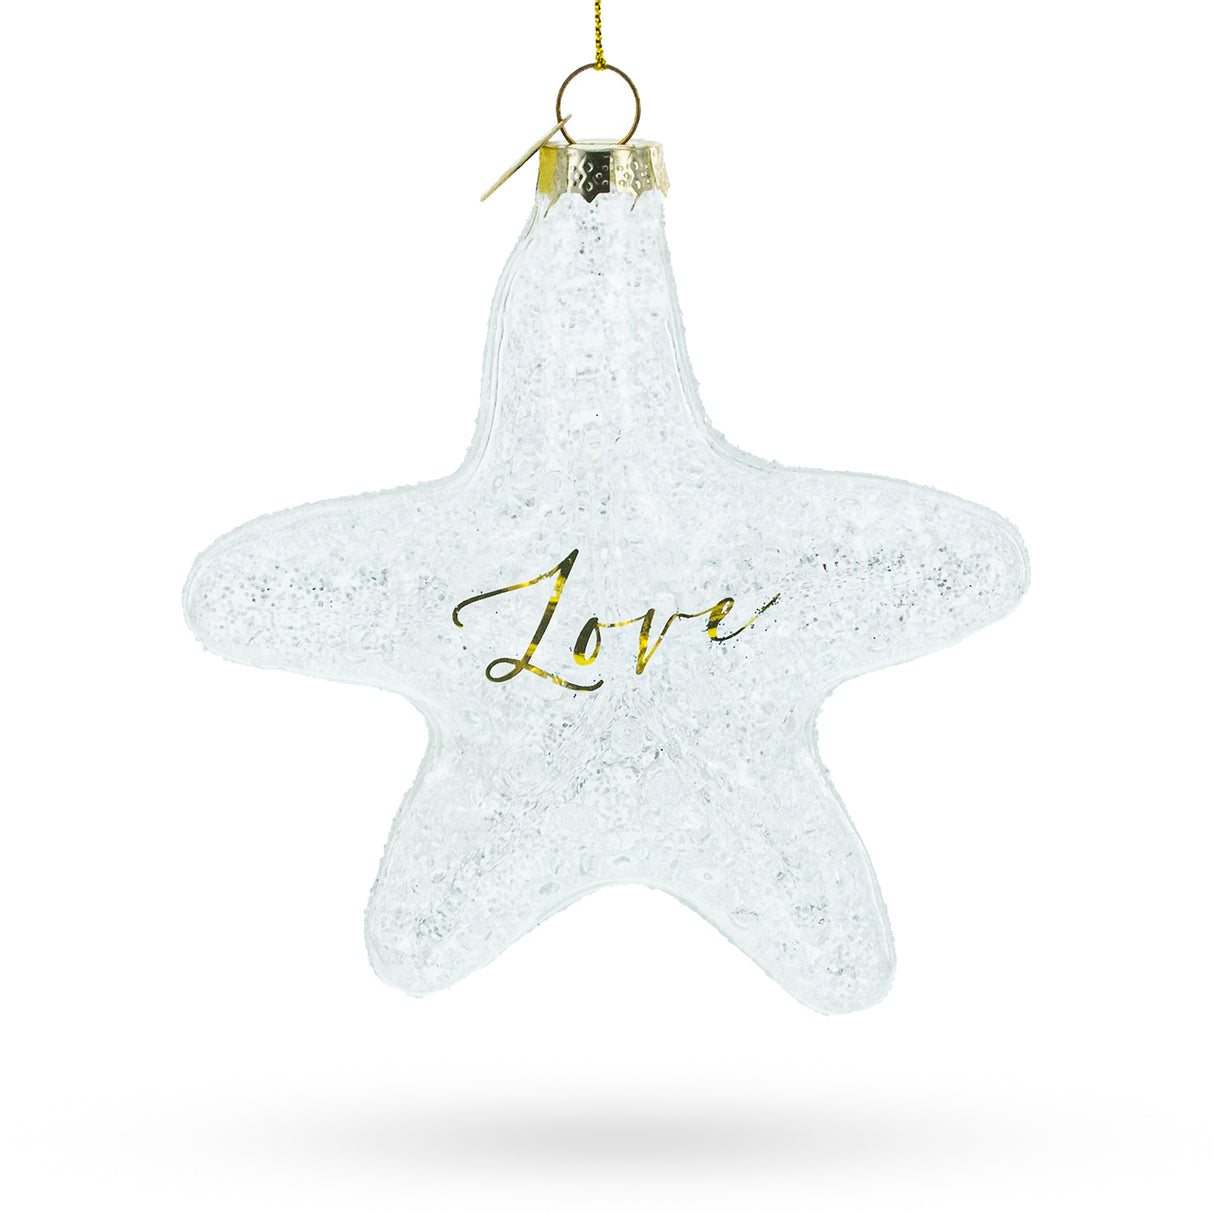 Glass Radiant White Star "Love" - Blown Glass Christmas Ornament in Clear color Star